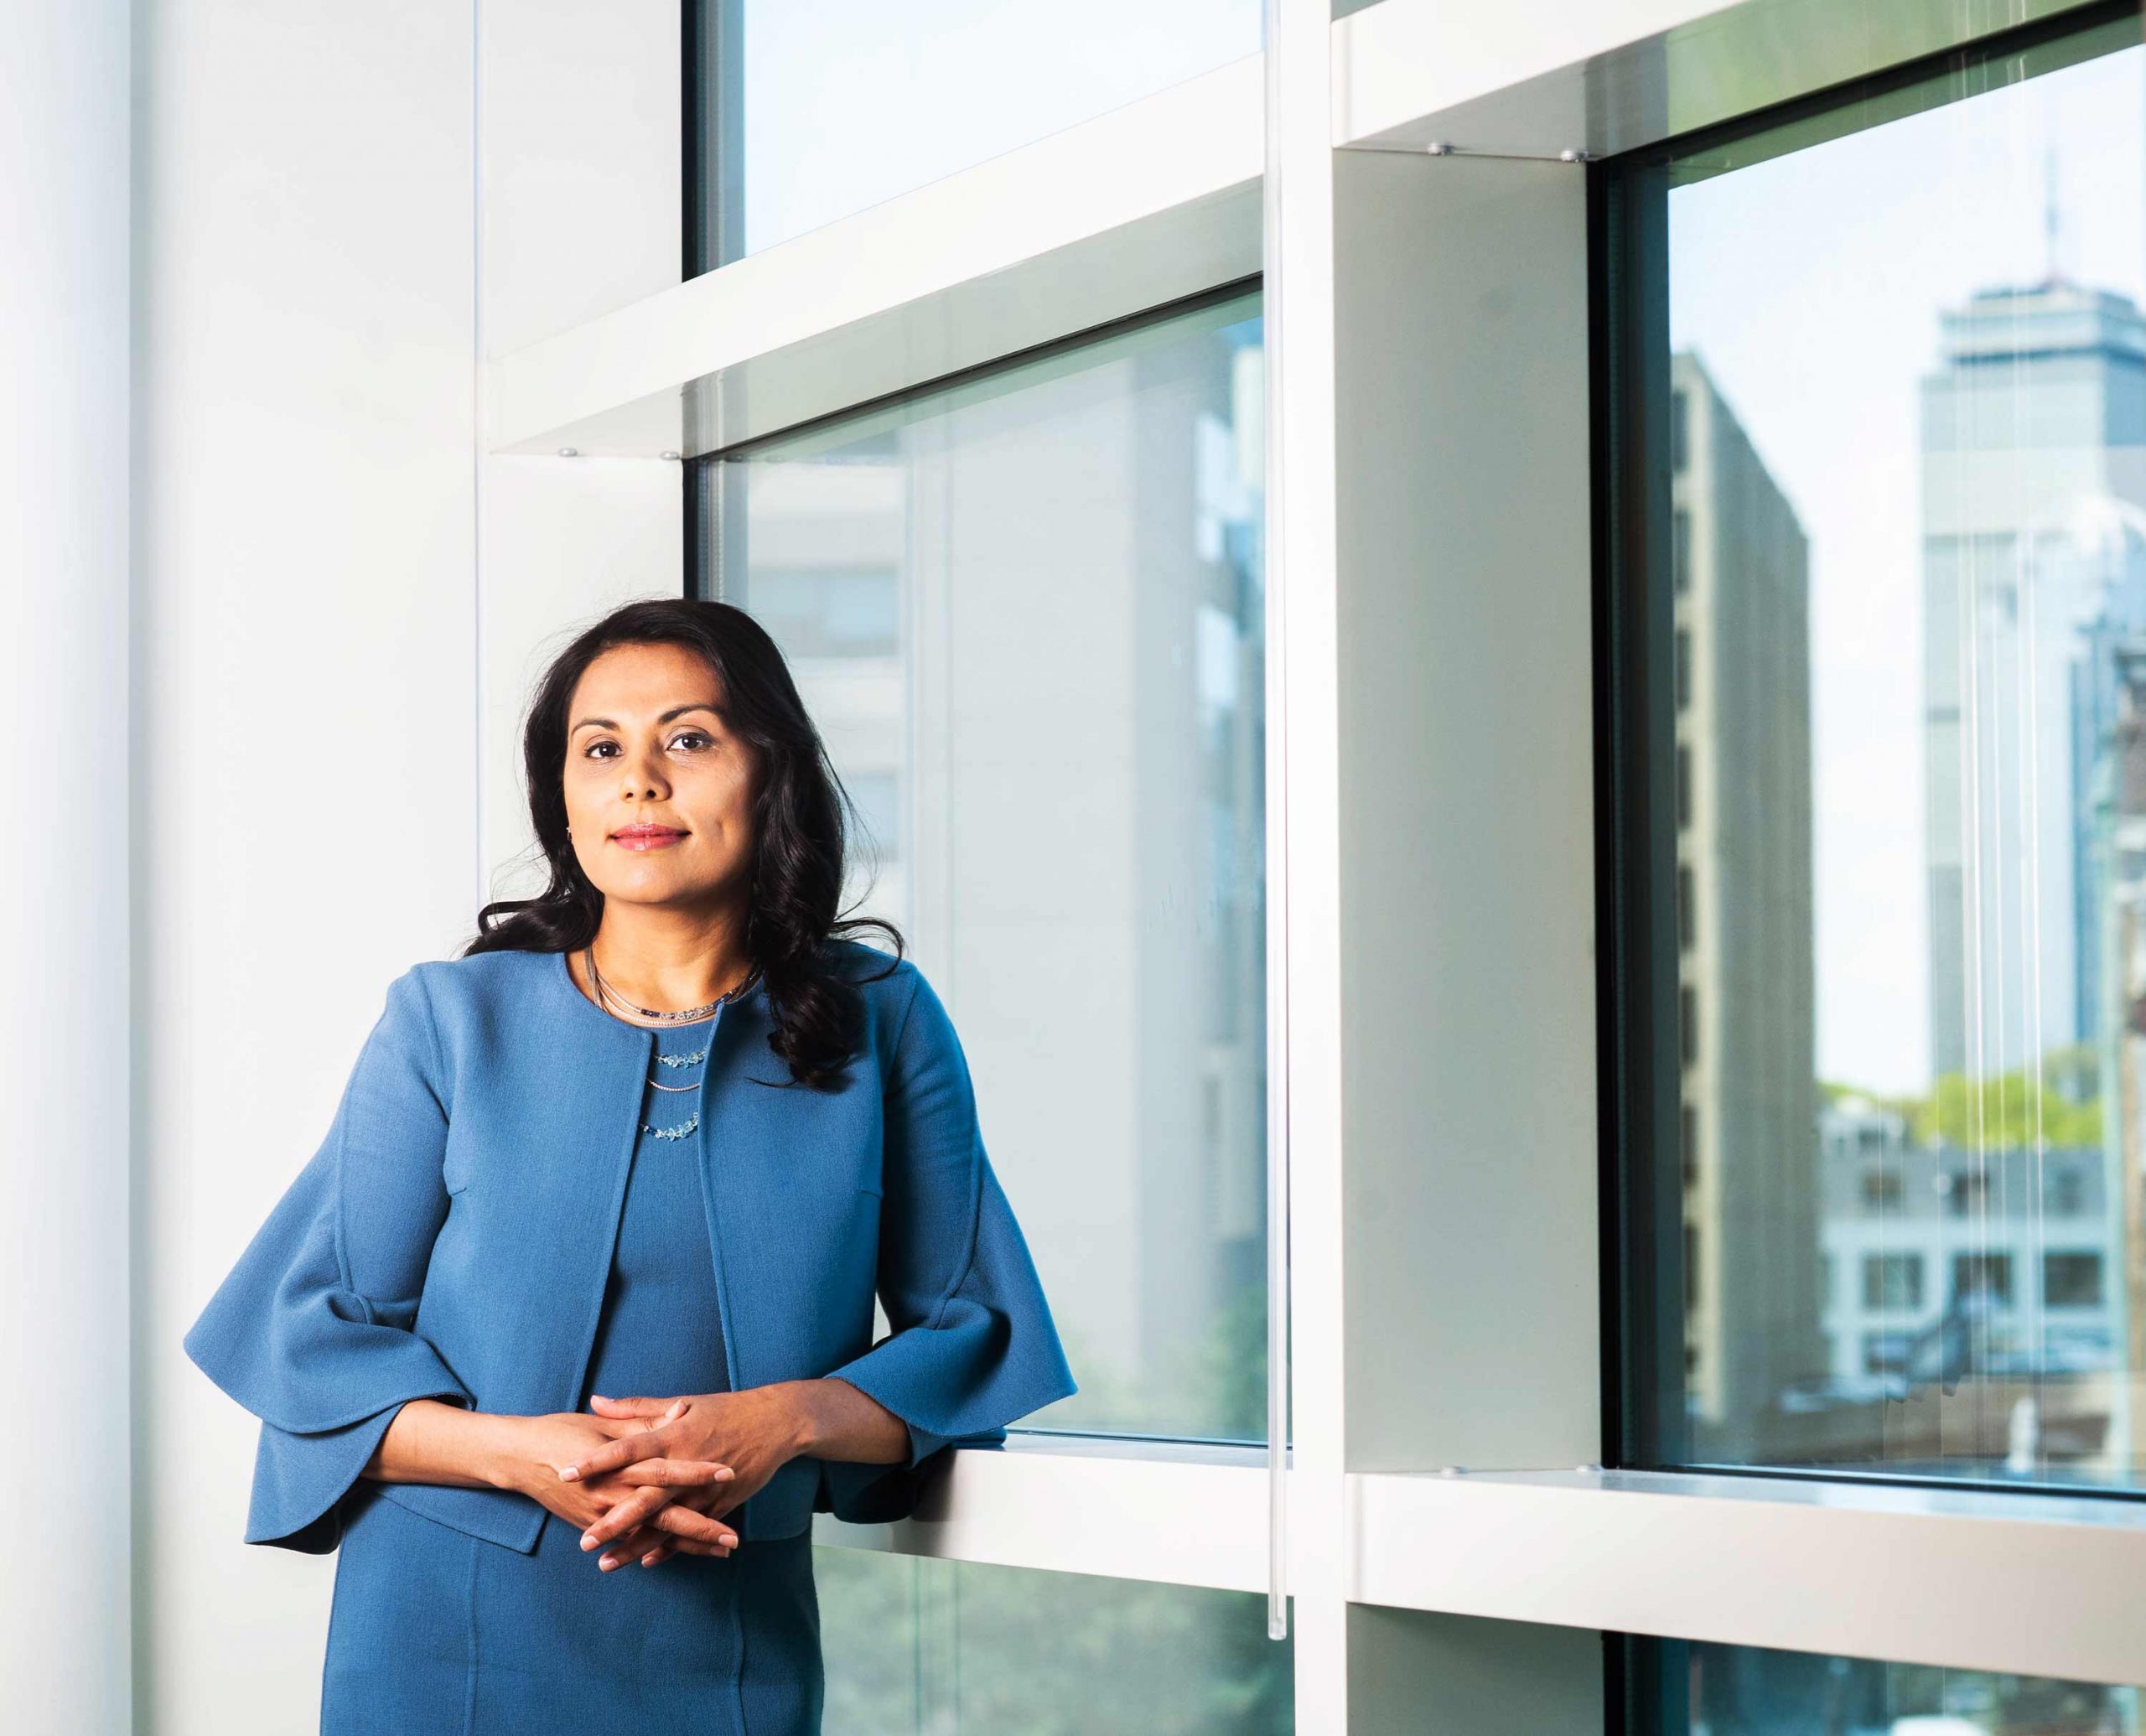 Portrait of Dr. Nahid Bhadelia leaning against a building in front of a window showing a reflection of the Boston skyline.